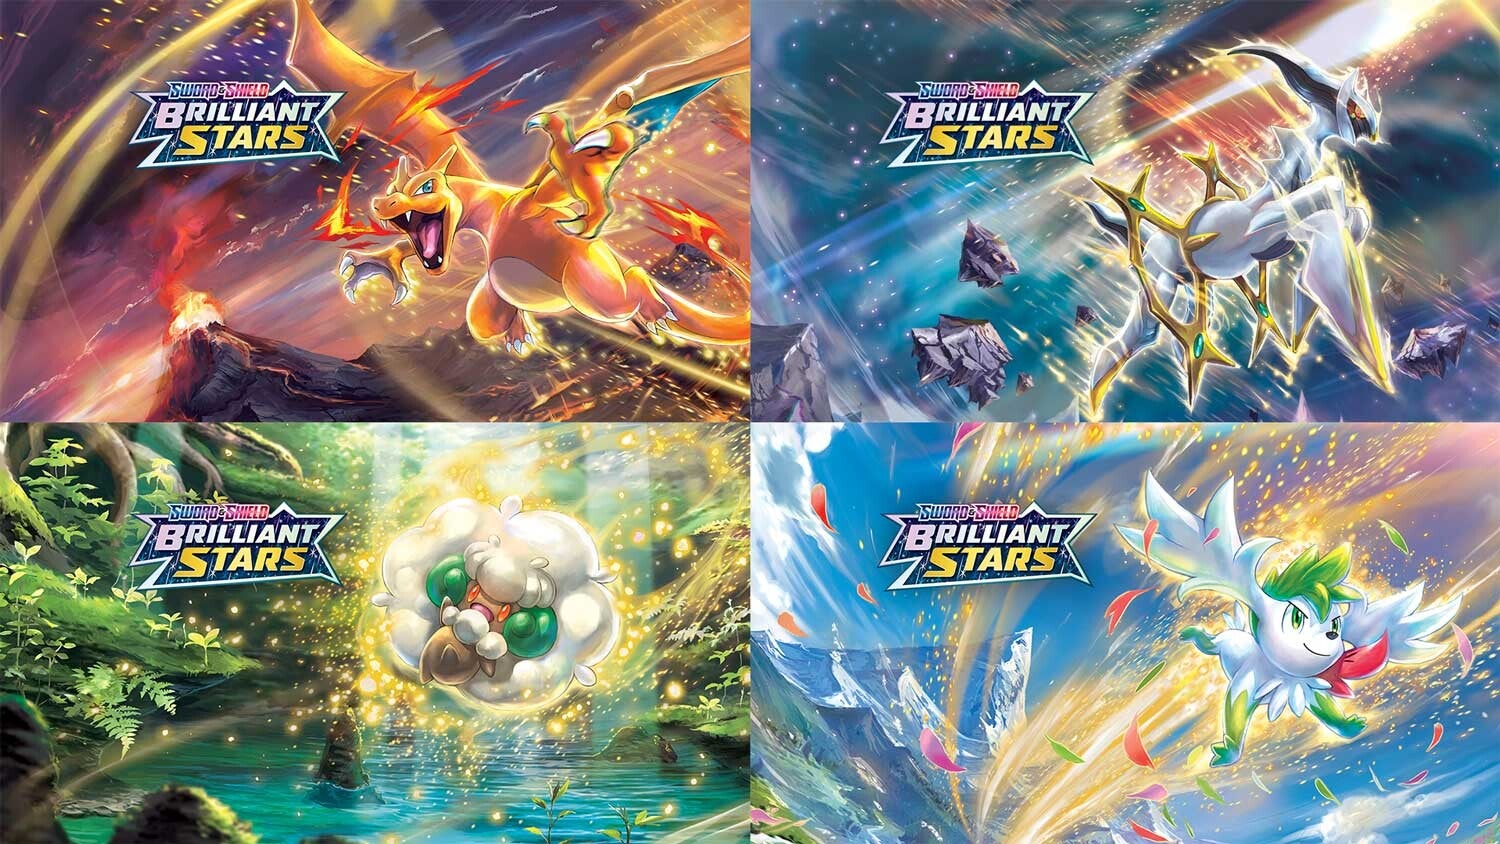 Download Brilliant Stars Wallpaper. PokeGuardian. We Bring You the Latest Pokémon TCG News Every Day!